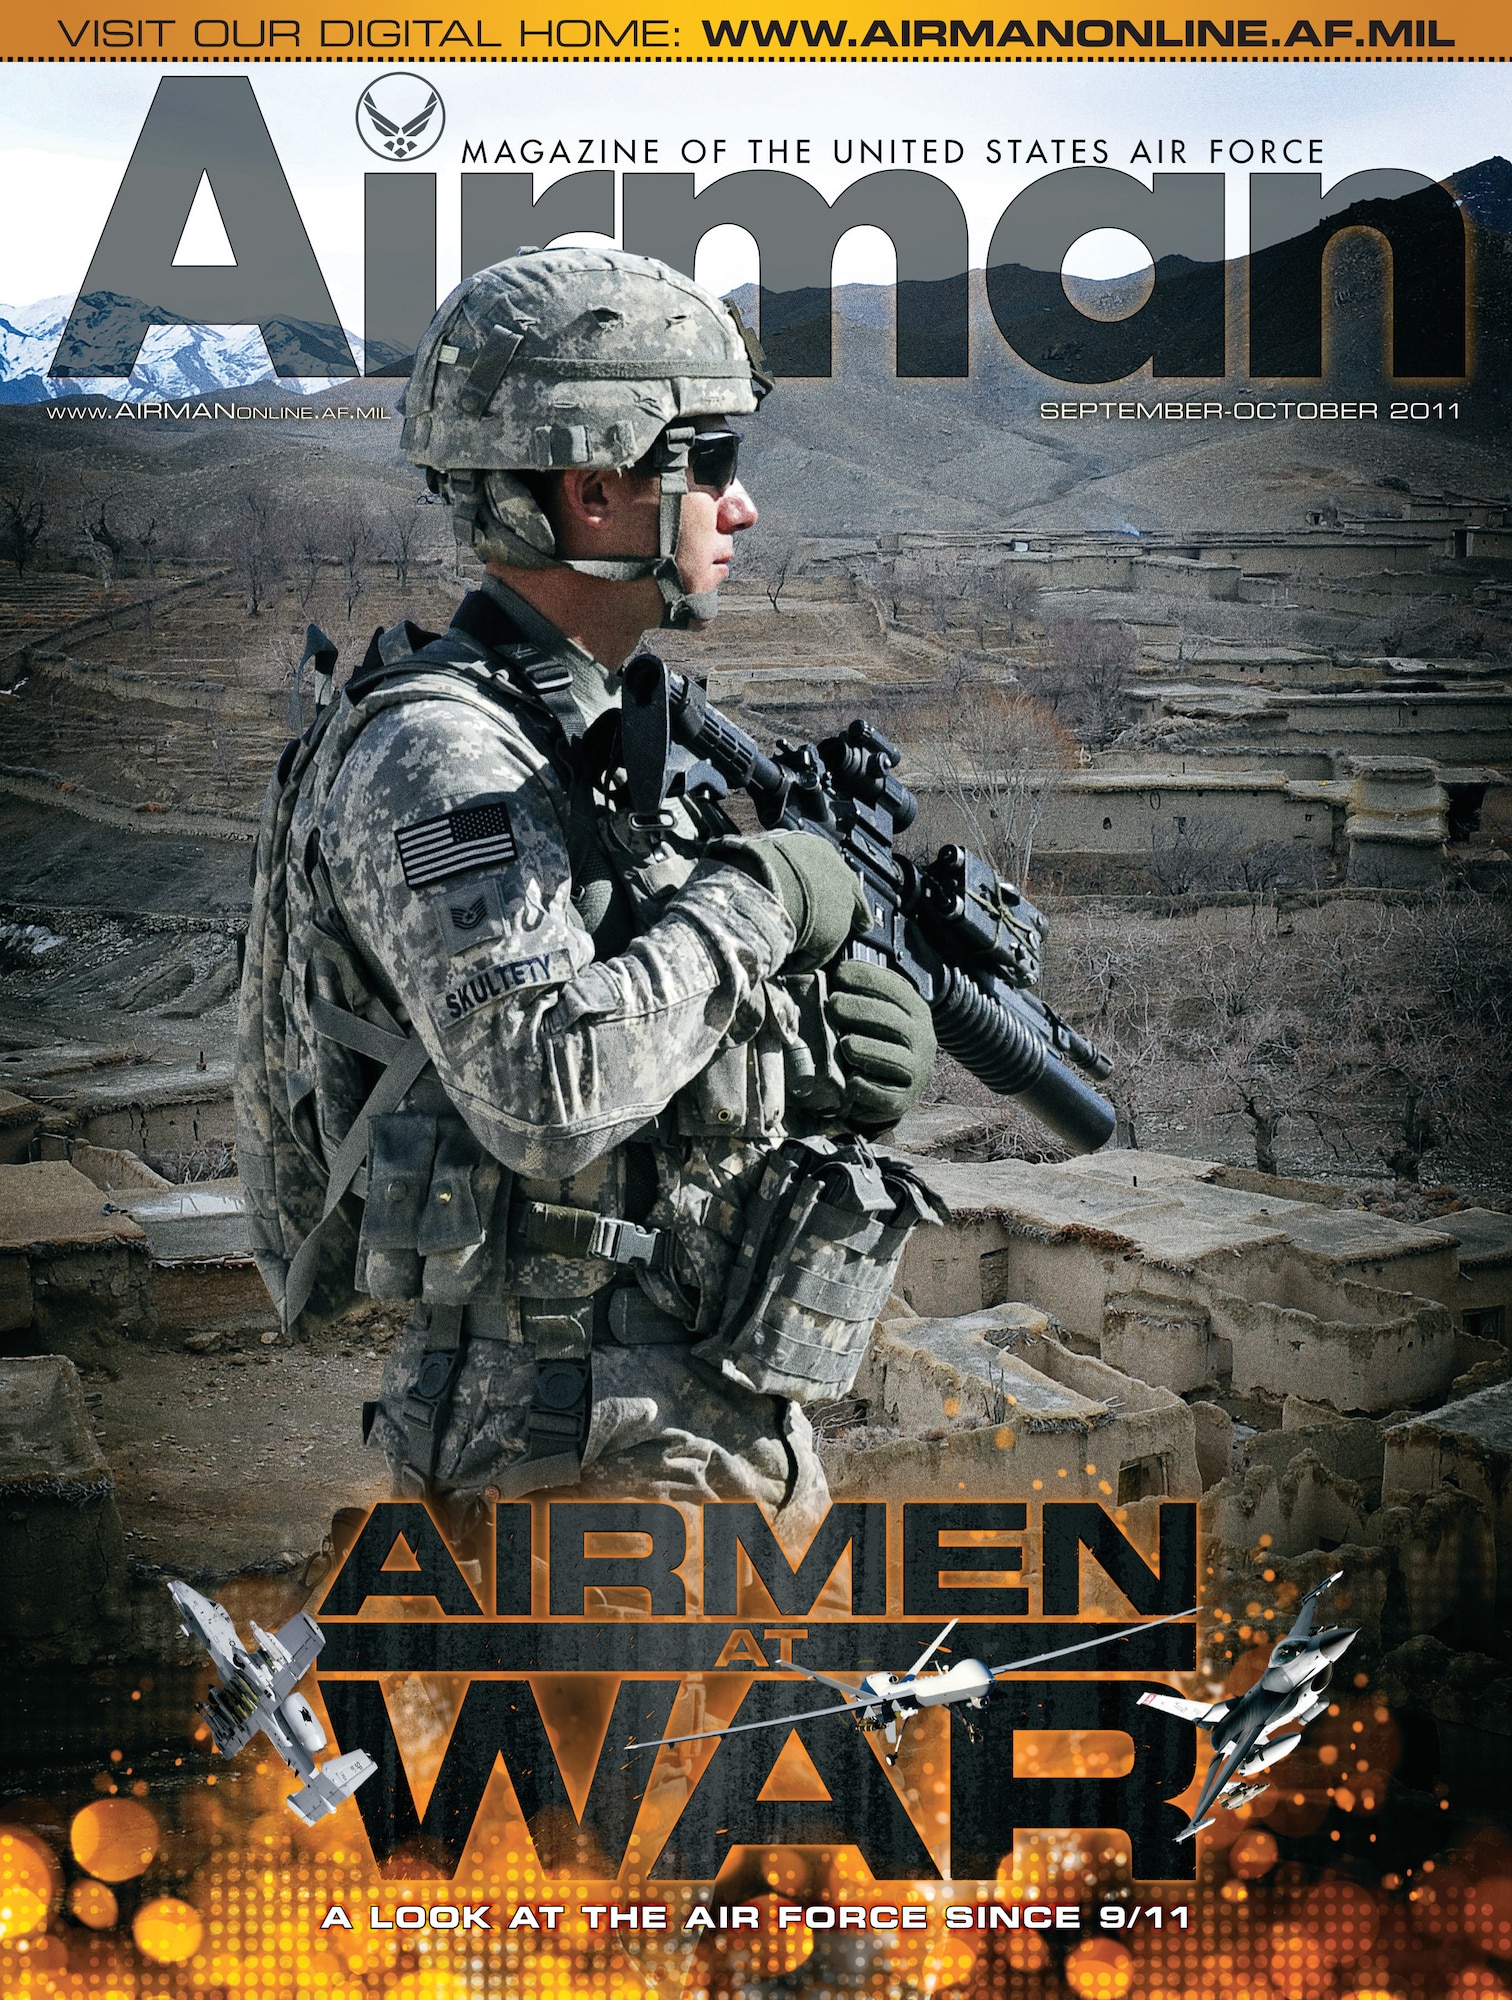 The cover page of the last print issue of Airman magazine. (U.S. Air Force graphic/Luke Borland)